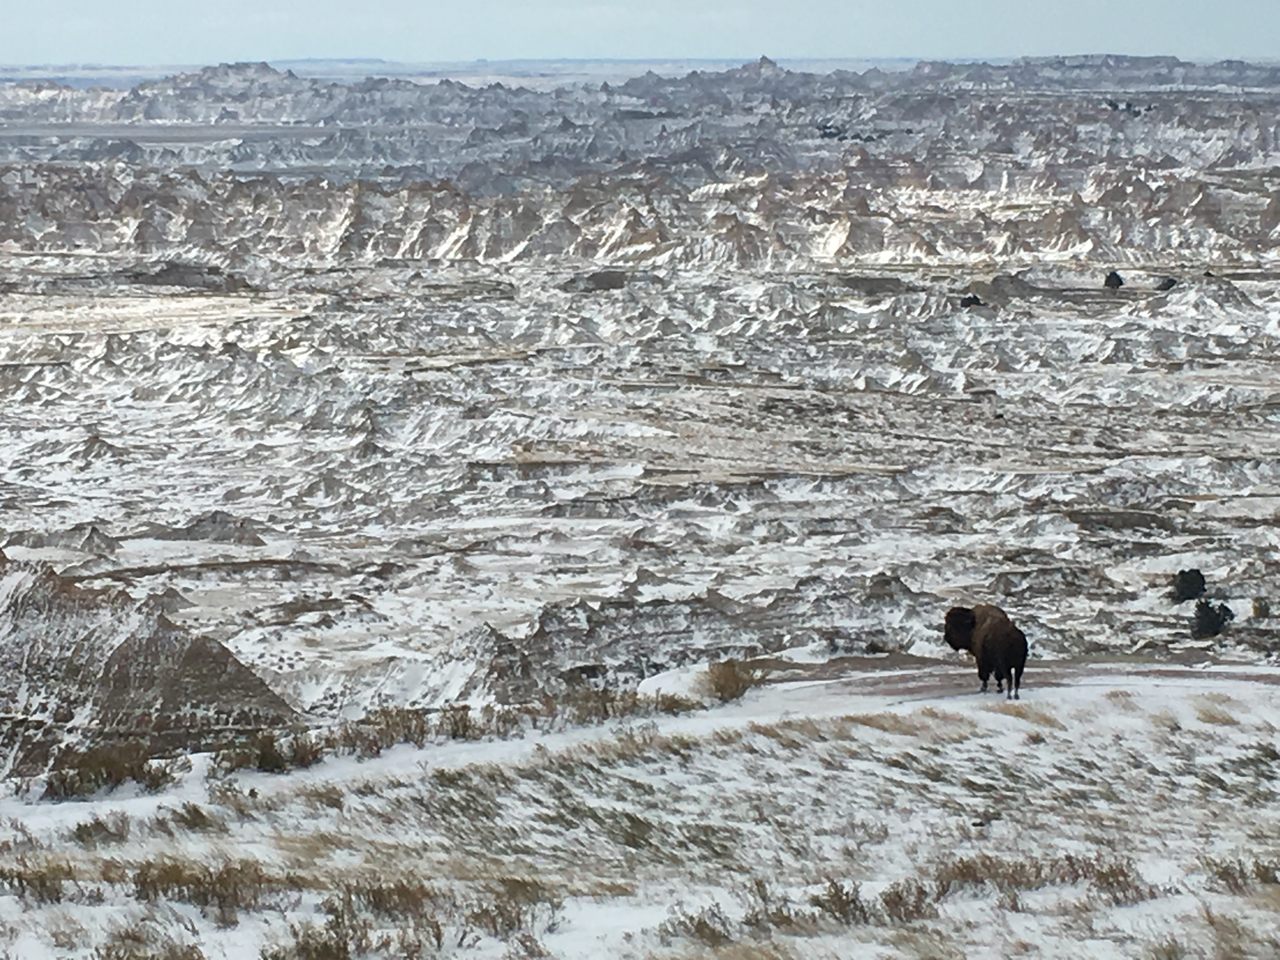 A lone bison bull overlooking the new tract of Badlands National Park where bison last roamed in 1877. 